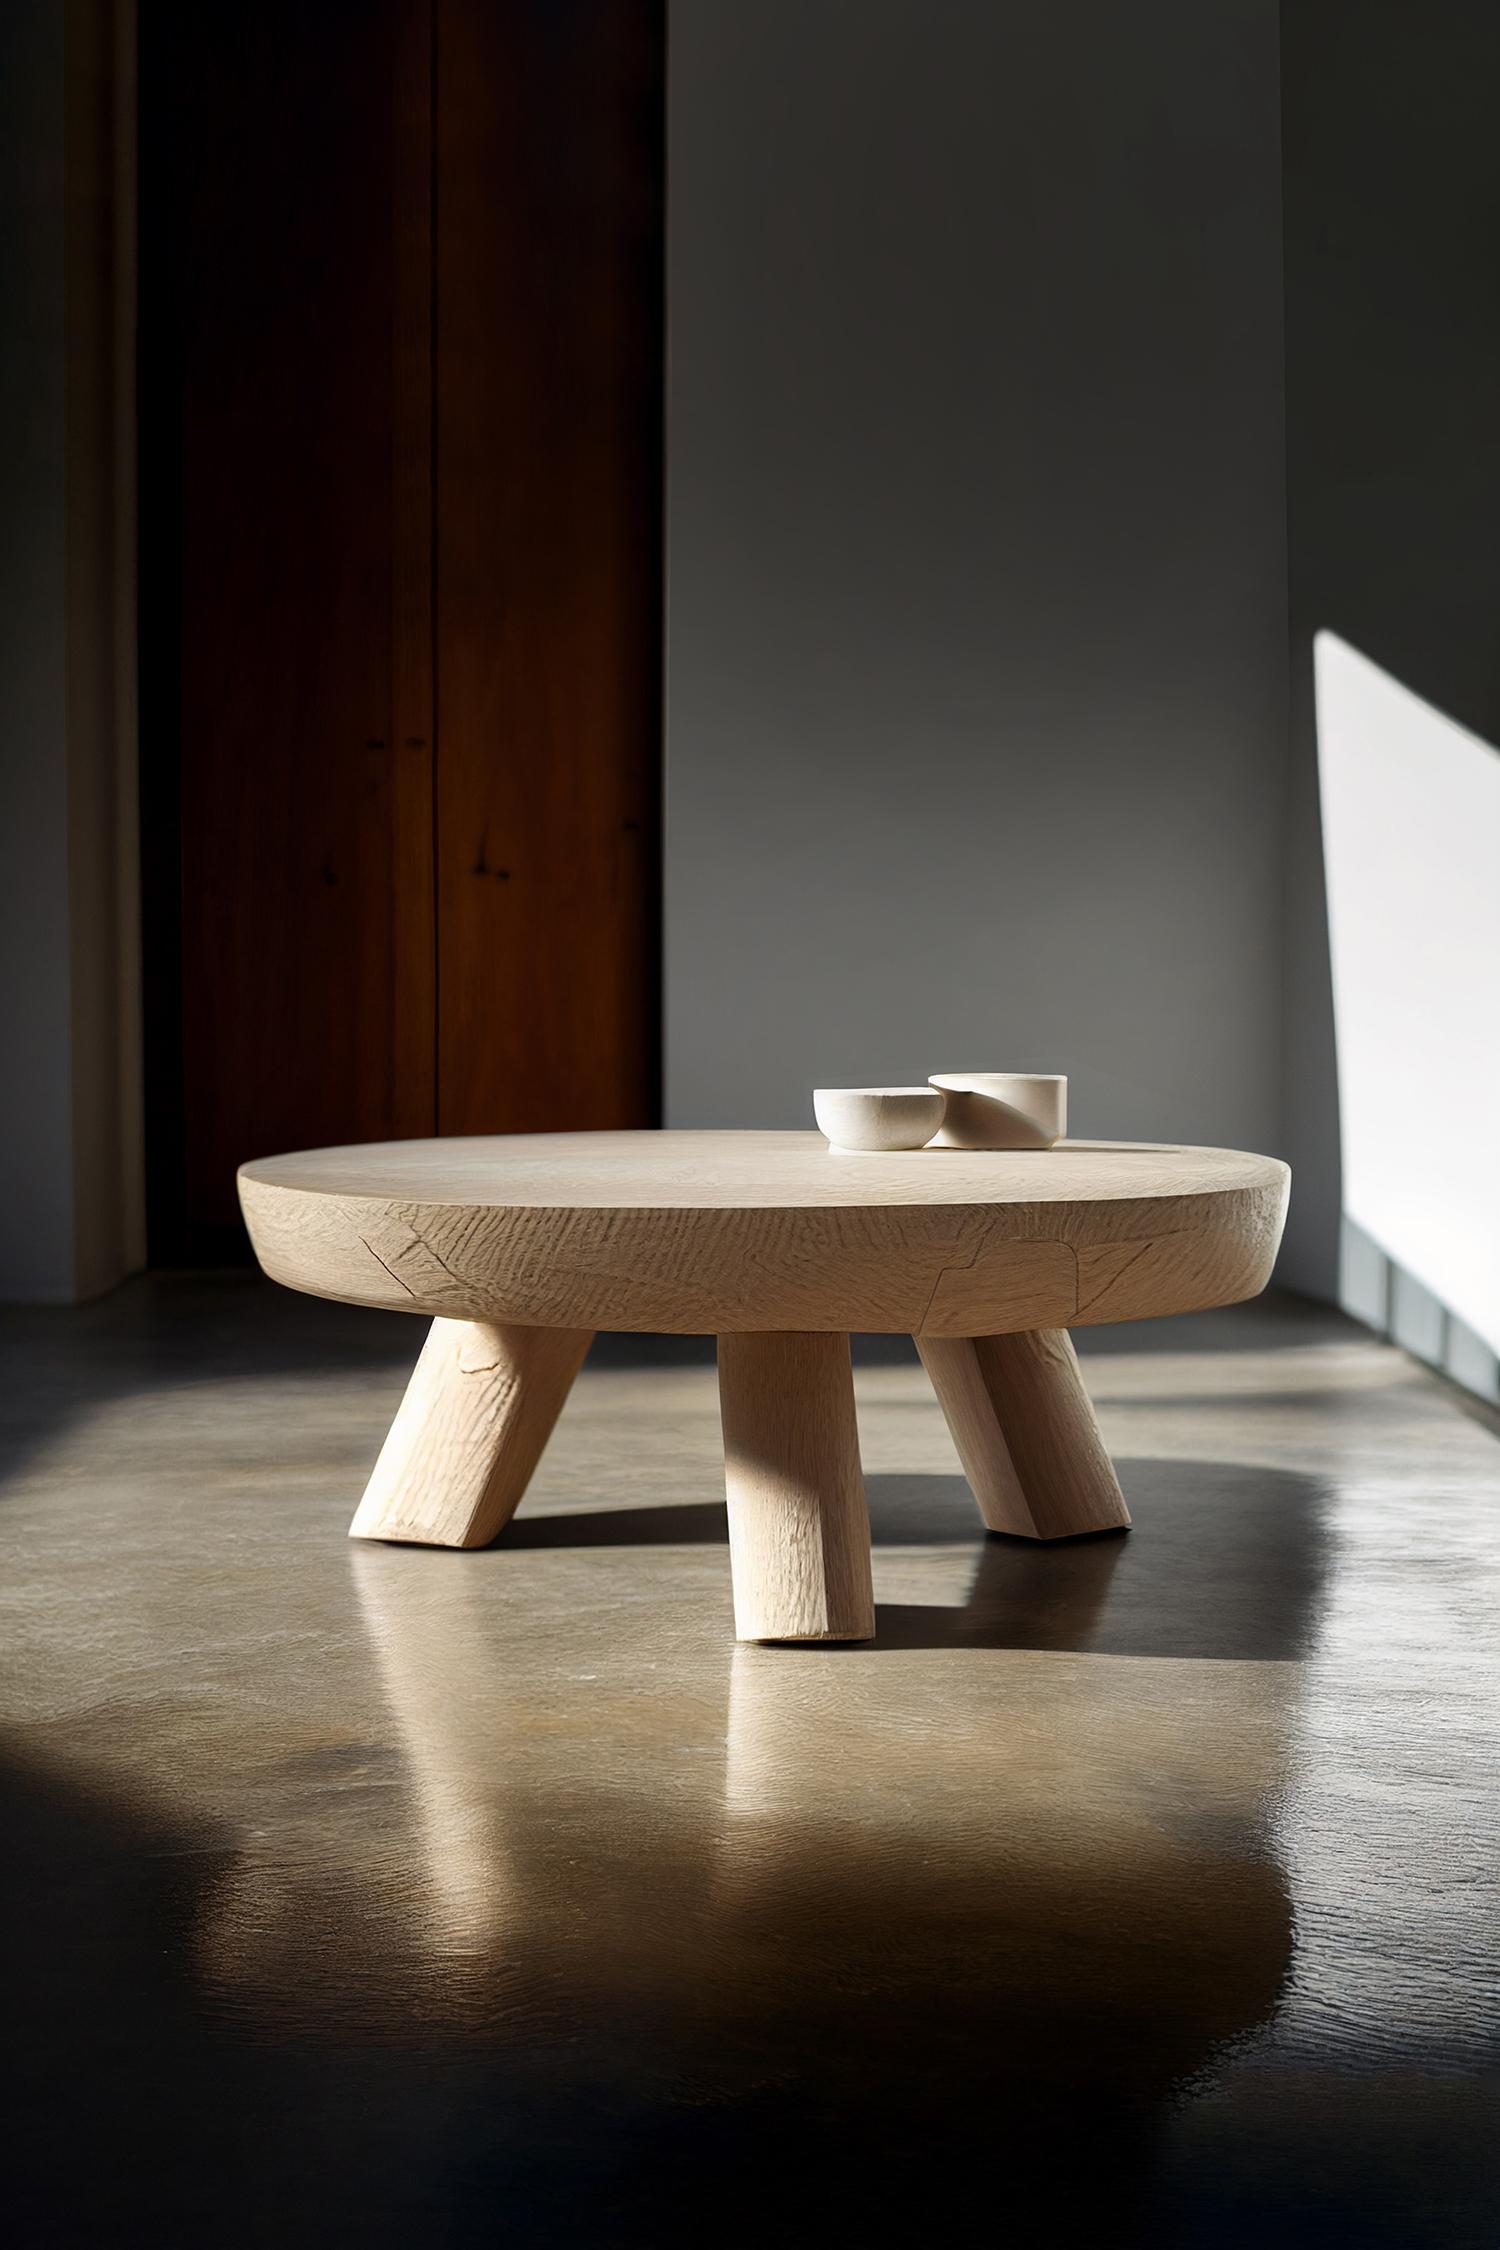 Hand-crafted Solid Thick Oak Round Coffee Table

Round coffee table with 4 legs made of solid thick oak.
Product made to order; some variances may apply to the final piece. 

——

NONO is a Mexican design brand with more than 10 years of experience